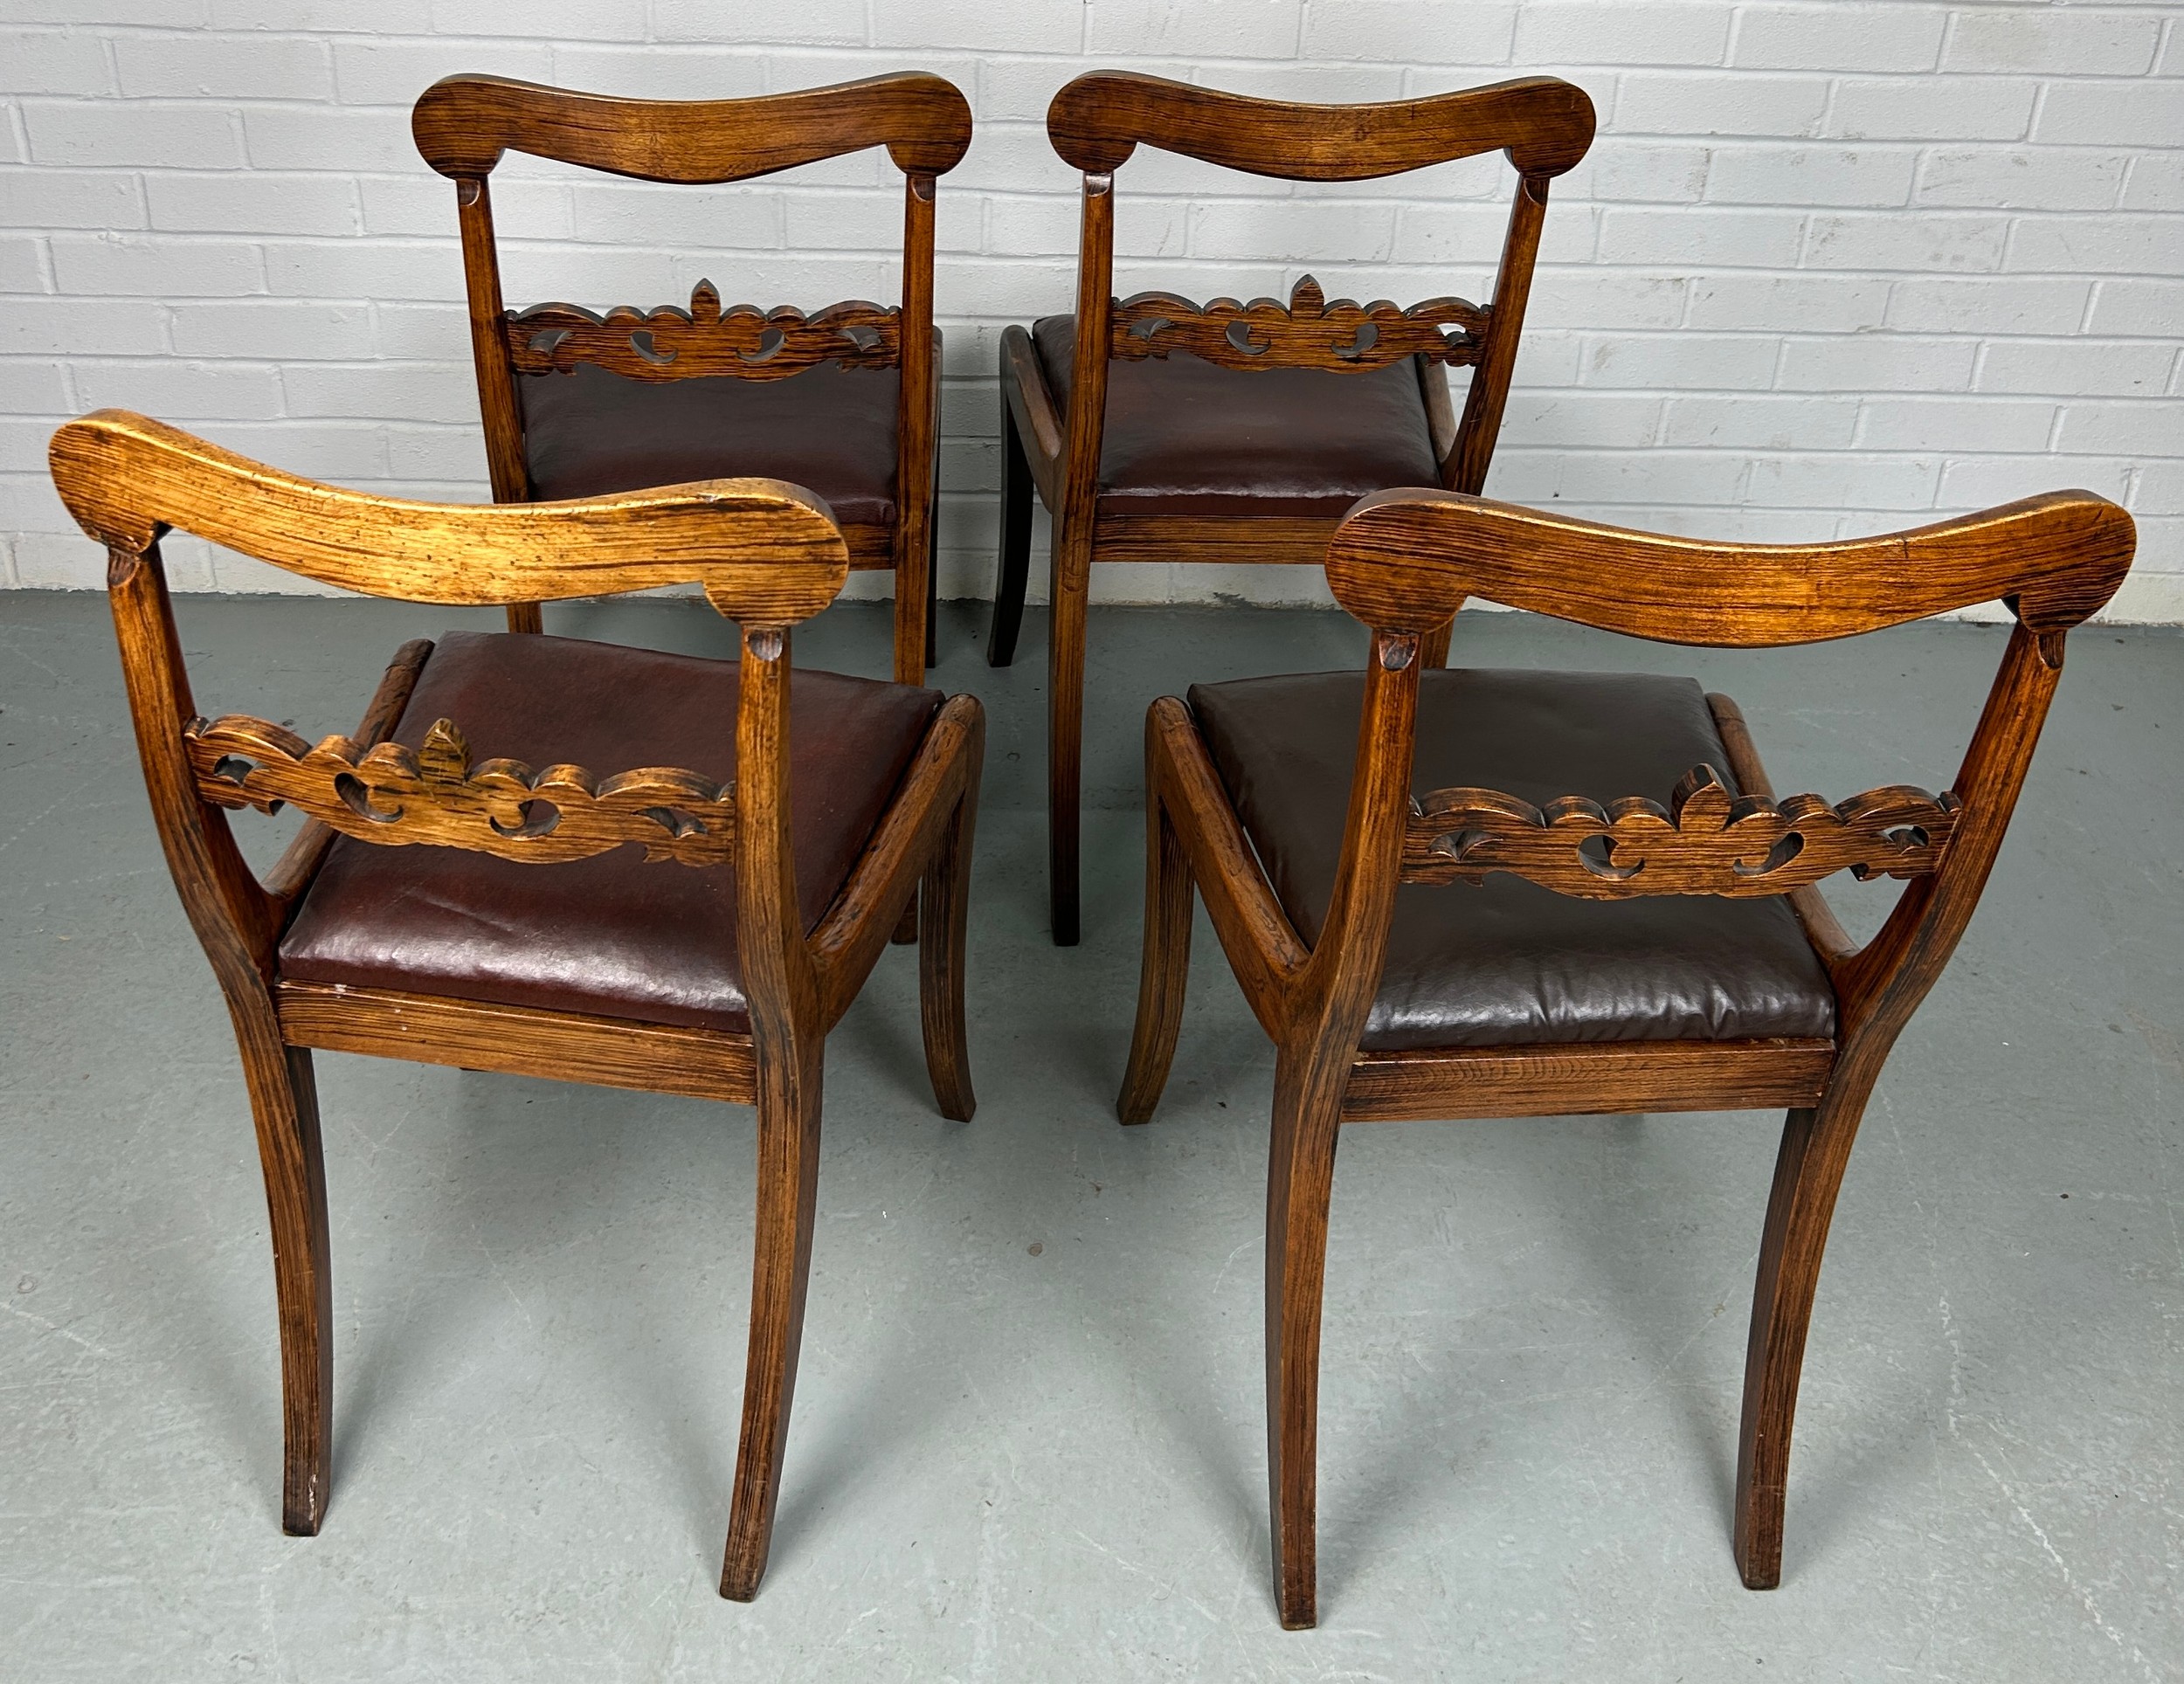 A SET OF FOUR 19TH CENTURY DINING CHAIRS WITH PIECED BACKS AND BROWN UPHOLSTERED SEATS (4) - Image 2 of 3